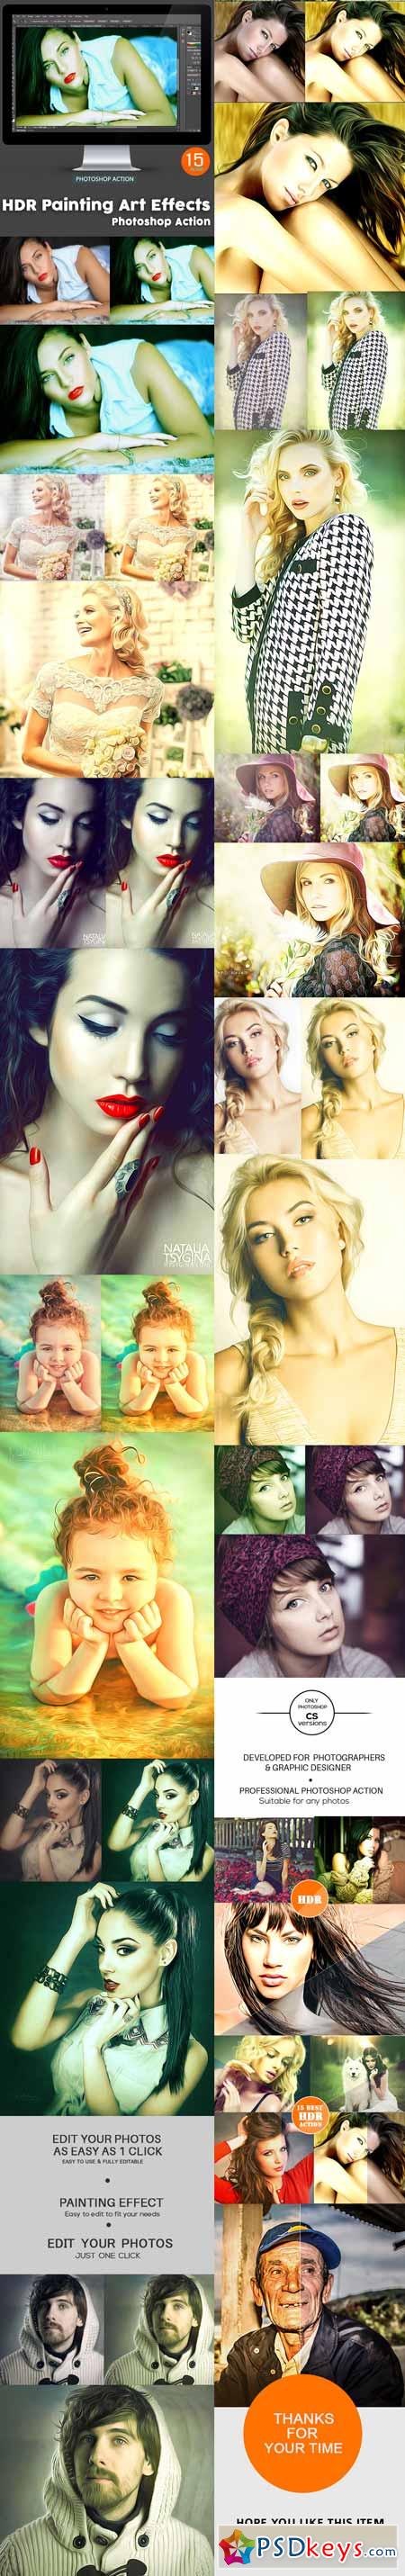 15 HDR Painting Art Effects - Photoshop Action 11416425